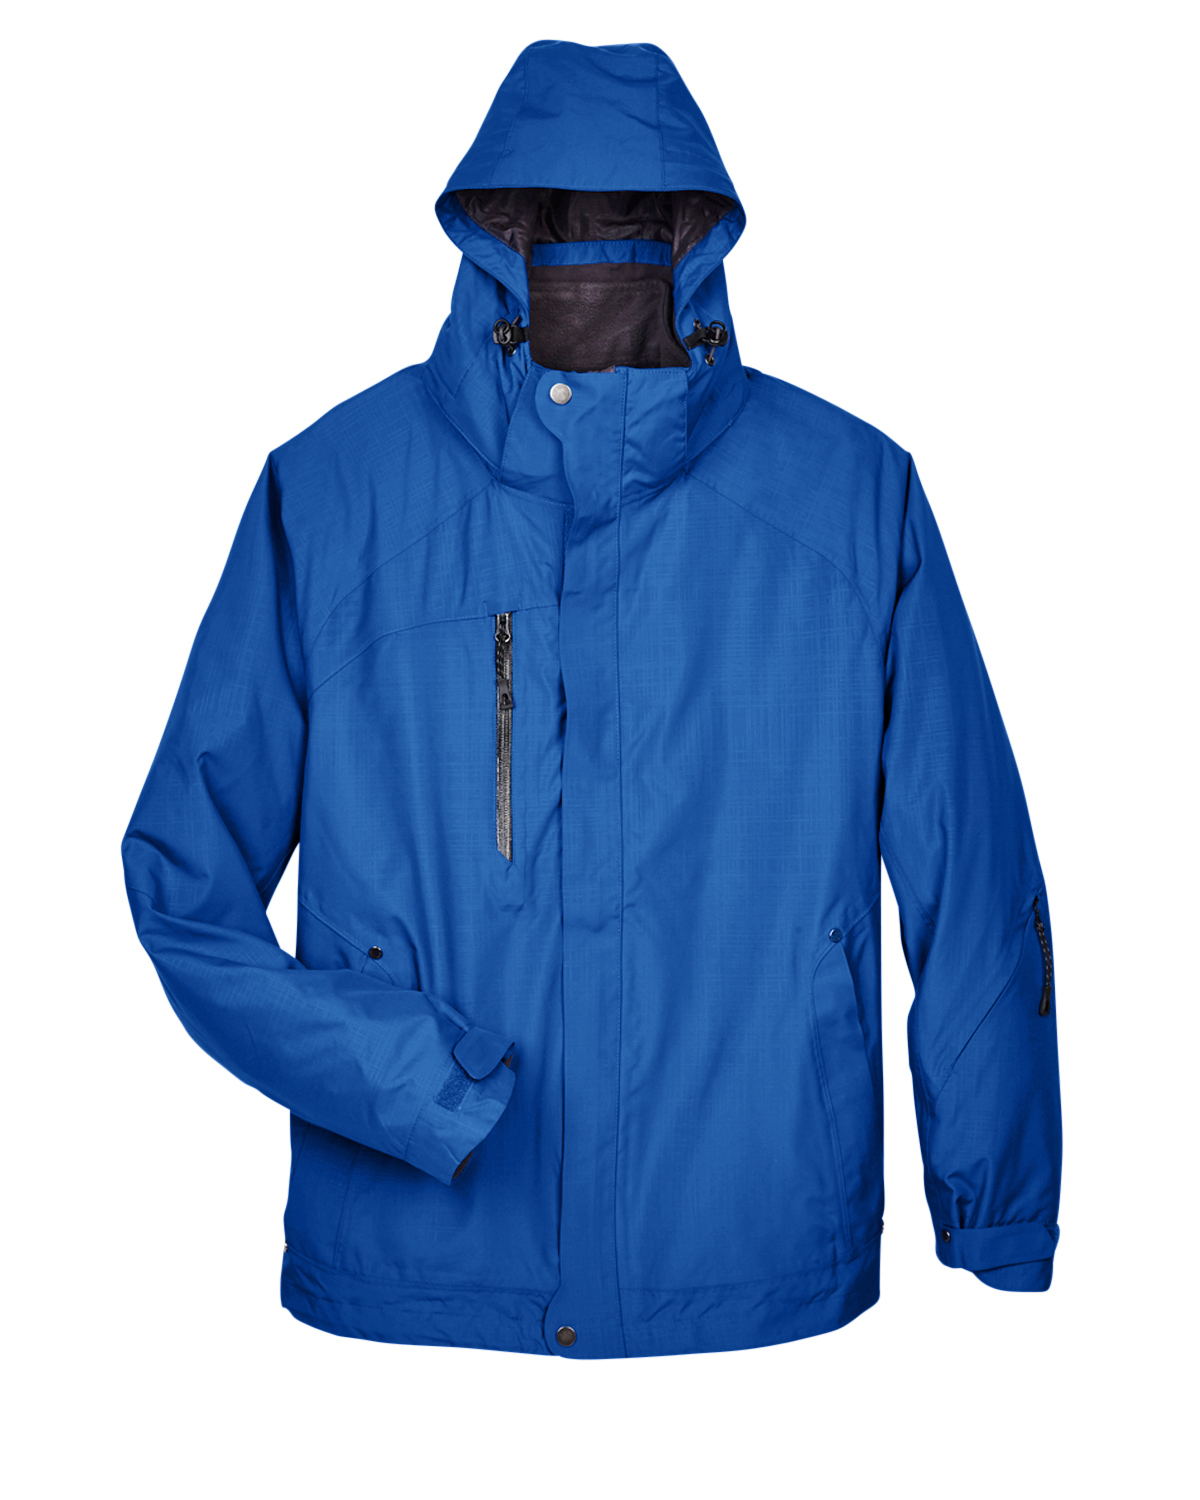 NORTH END MEN'S CAPRICE 3-IN-1 JACKET WITH SOFT SHELL LINER - Great ...